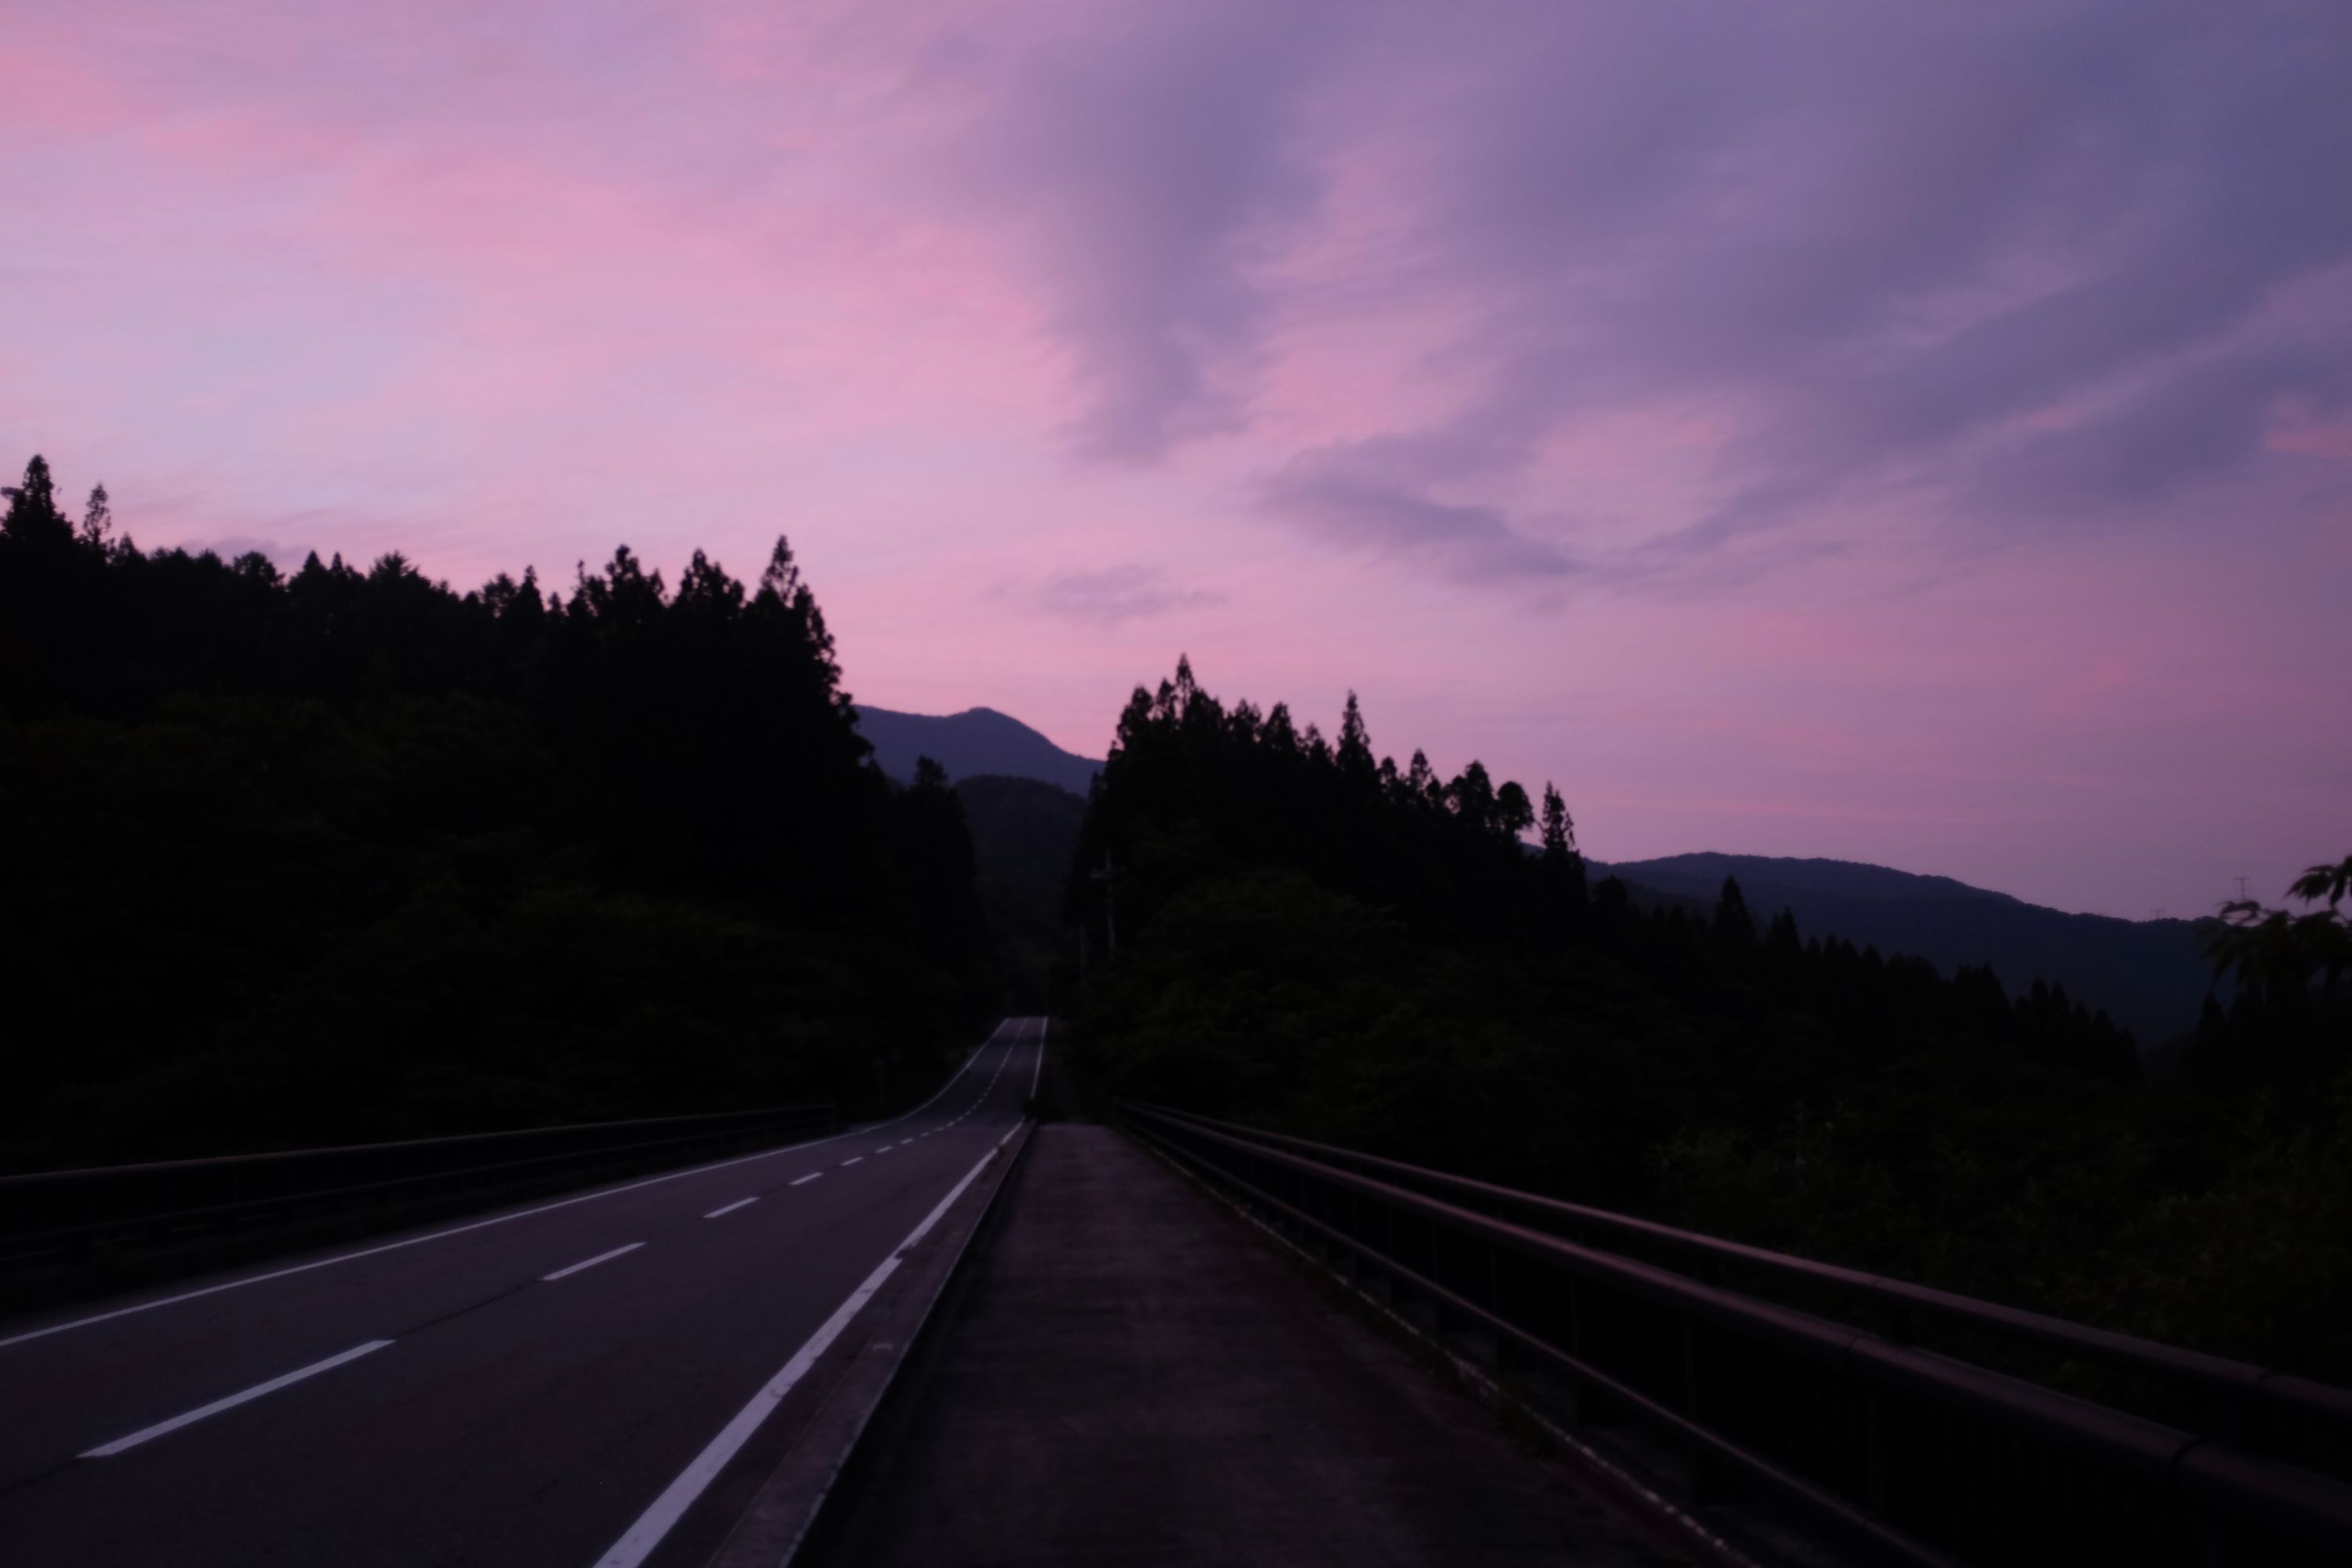 A road leads into a forest under a pink-purple evening sky.